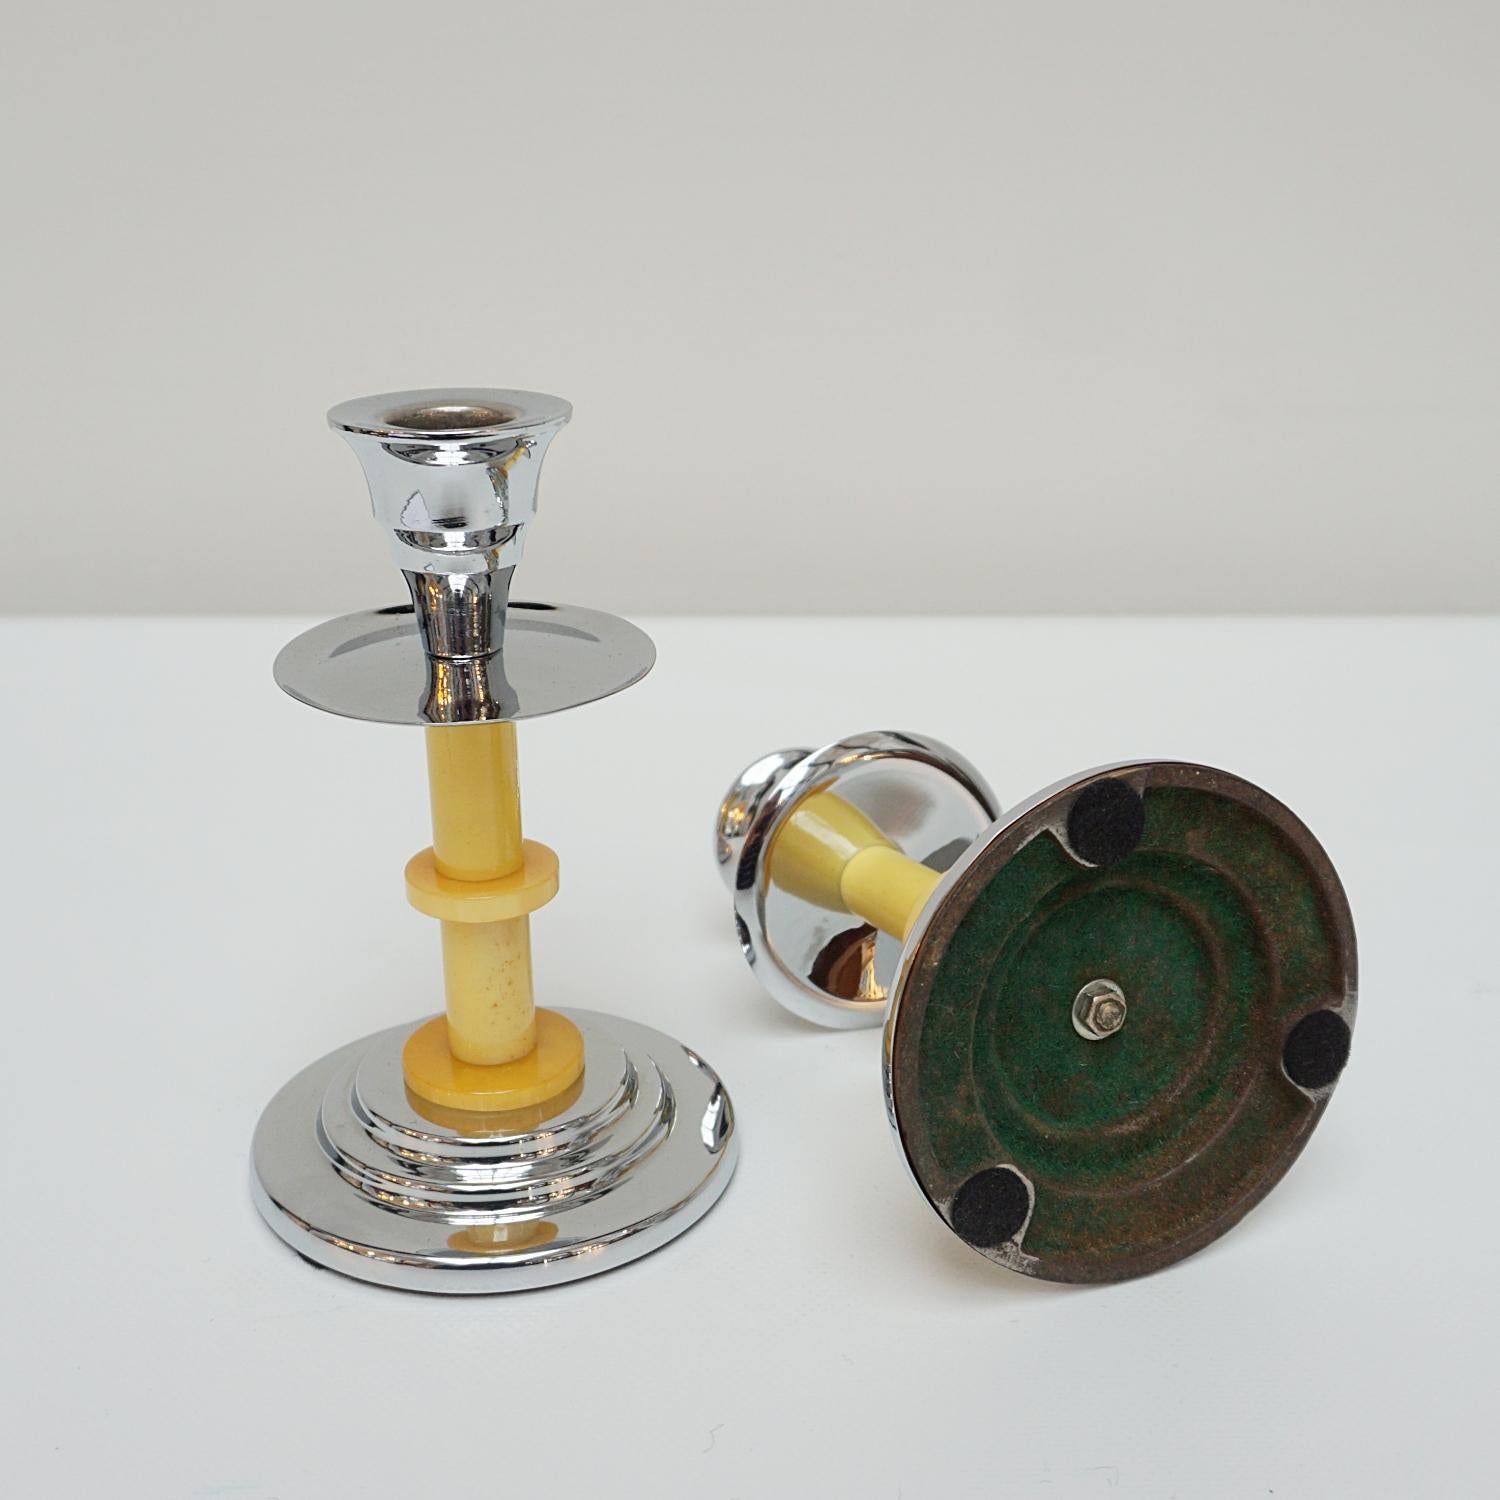 A pair of Art Deco candlesticks. Yellow dual ringed bakelite stem. Set over a rounded, stepped chromed metal base with chromed metal top. 

Dimensions: H 16cm W 10cm

Origin: English

Date: Circa 1935

Item Number: 2710234

Re-chromed and polished